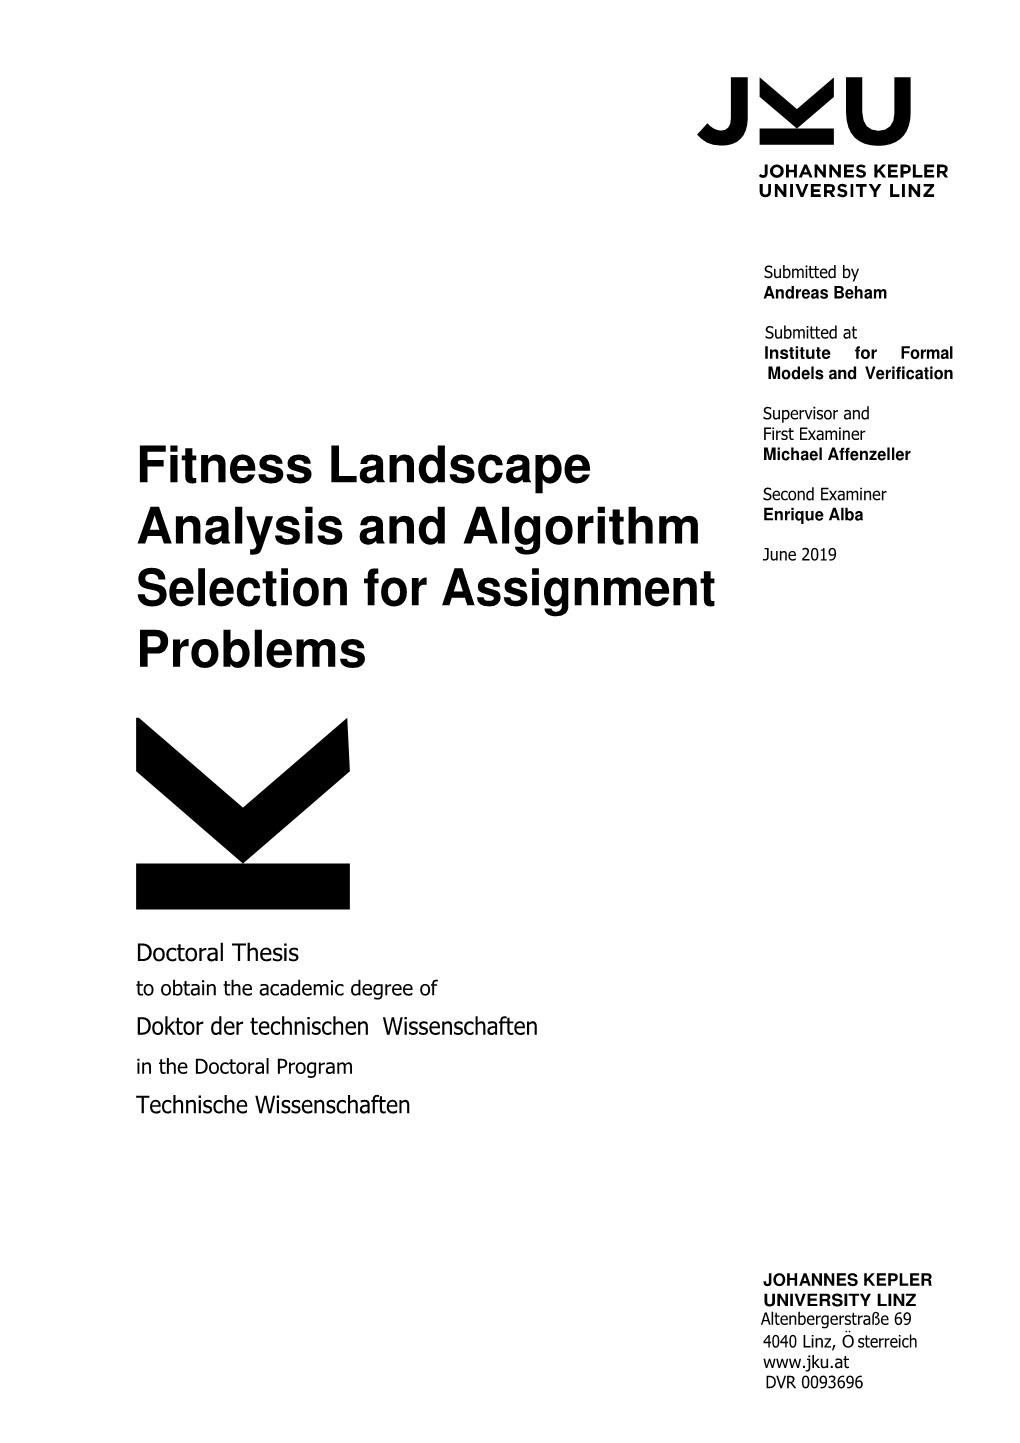 Fitness Landscape Analysis and Algorithm Selection for Assignment